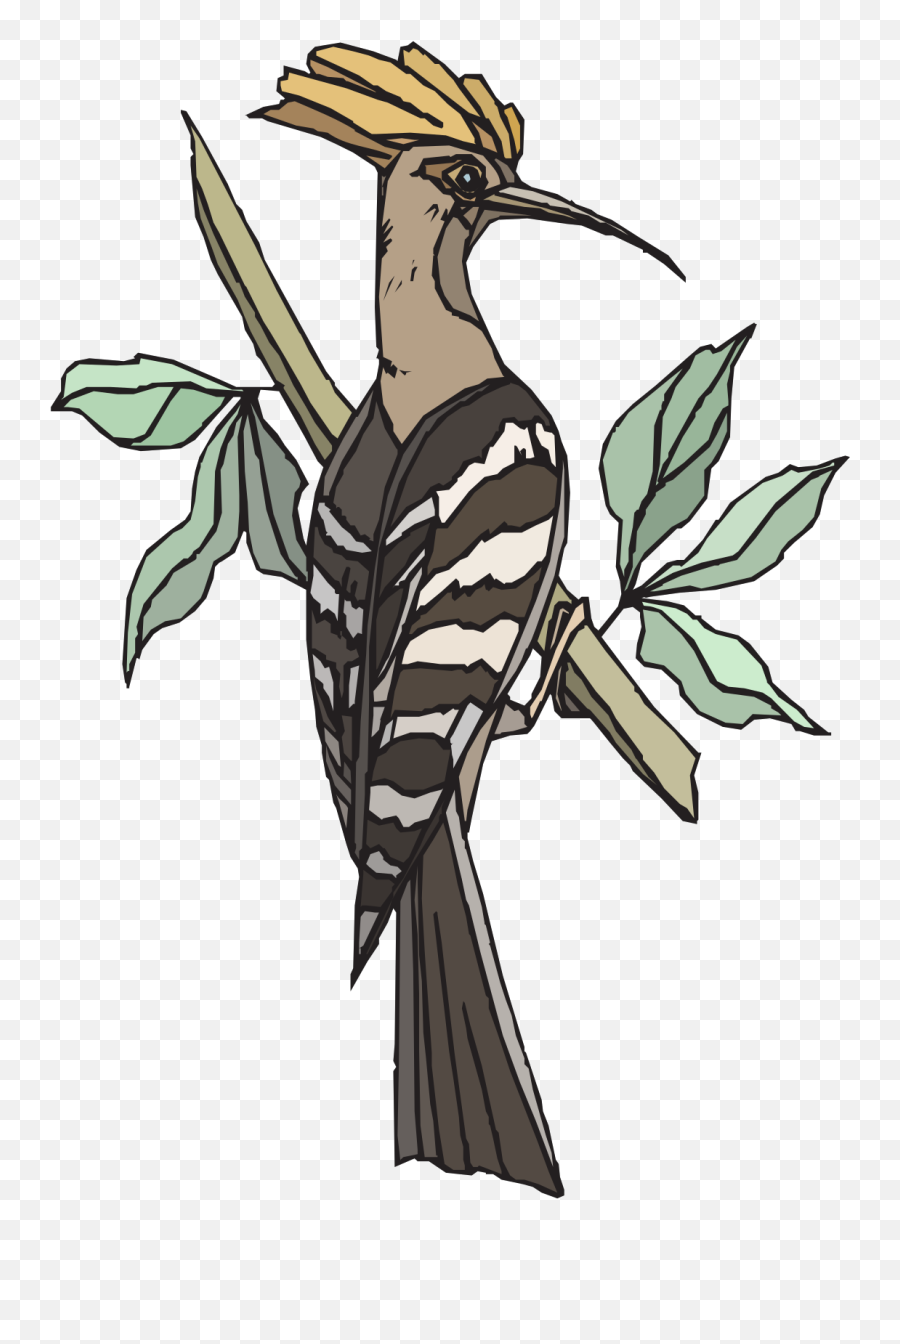 Hoopoe Perched On Tree Branch Svg Vector Hoopoe Perched On Emoji,Osprey Clipart